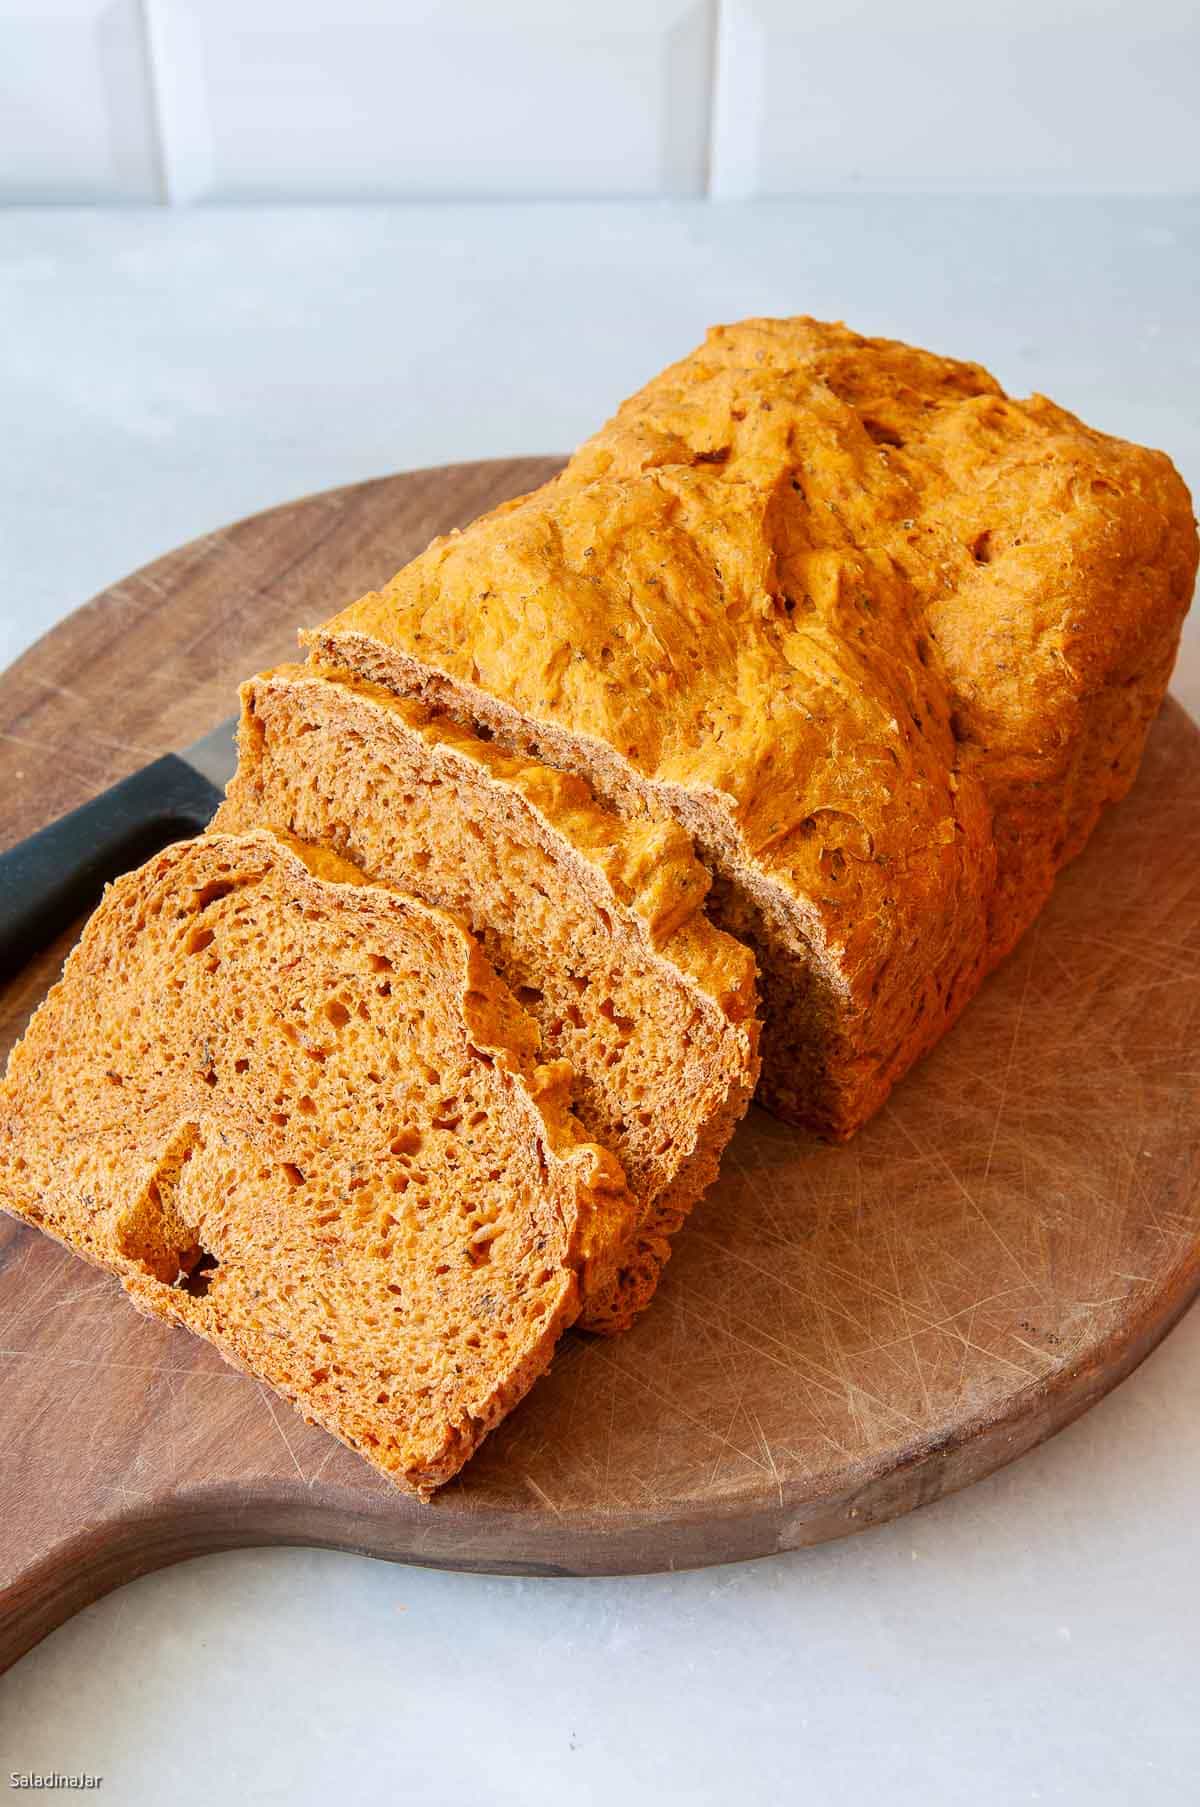 tomato basil bread mixed and baked in a bread machine